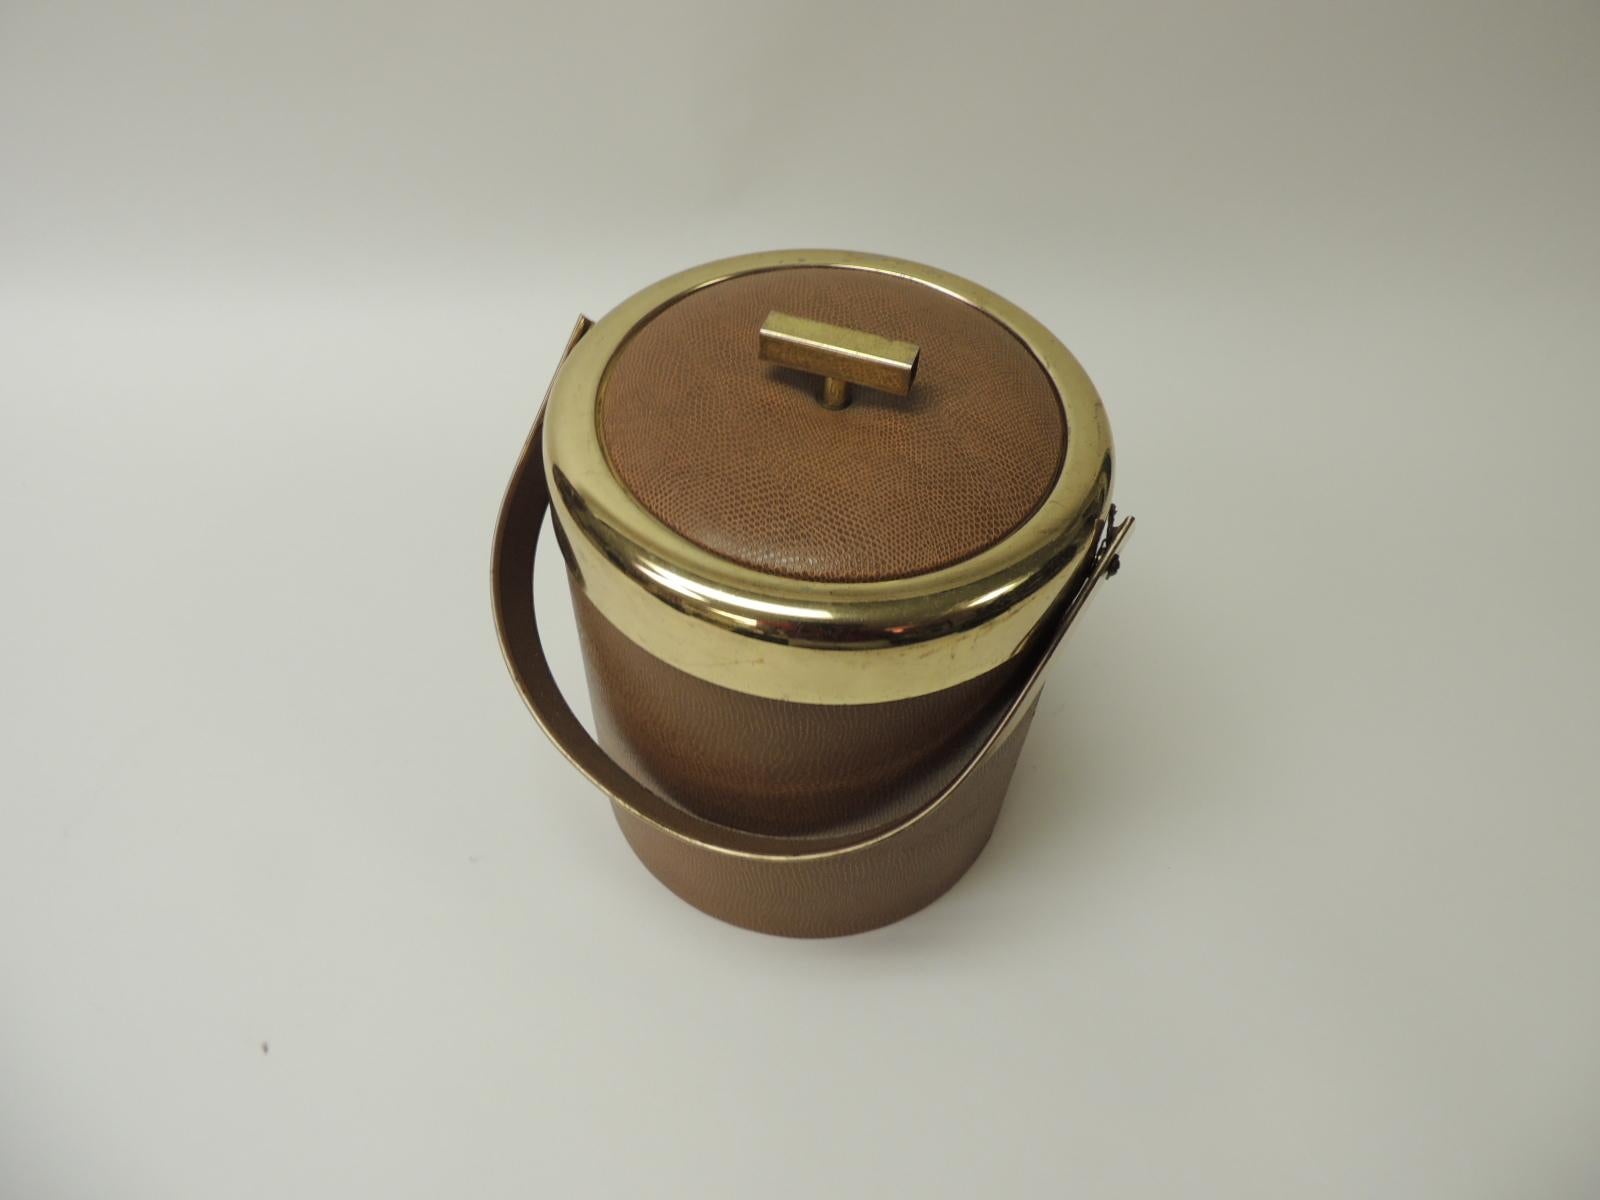 Mid-Century Modern ice bucket with gold handle.
Plastic sha-green brown texture to look like leather, plastic liner.
Brass handle and finial.
USA signed George Briart
1980s.
Size: 9 x 9 x 10.